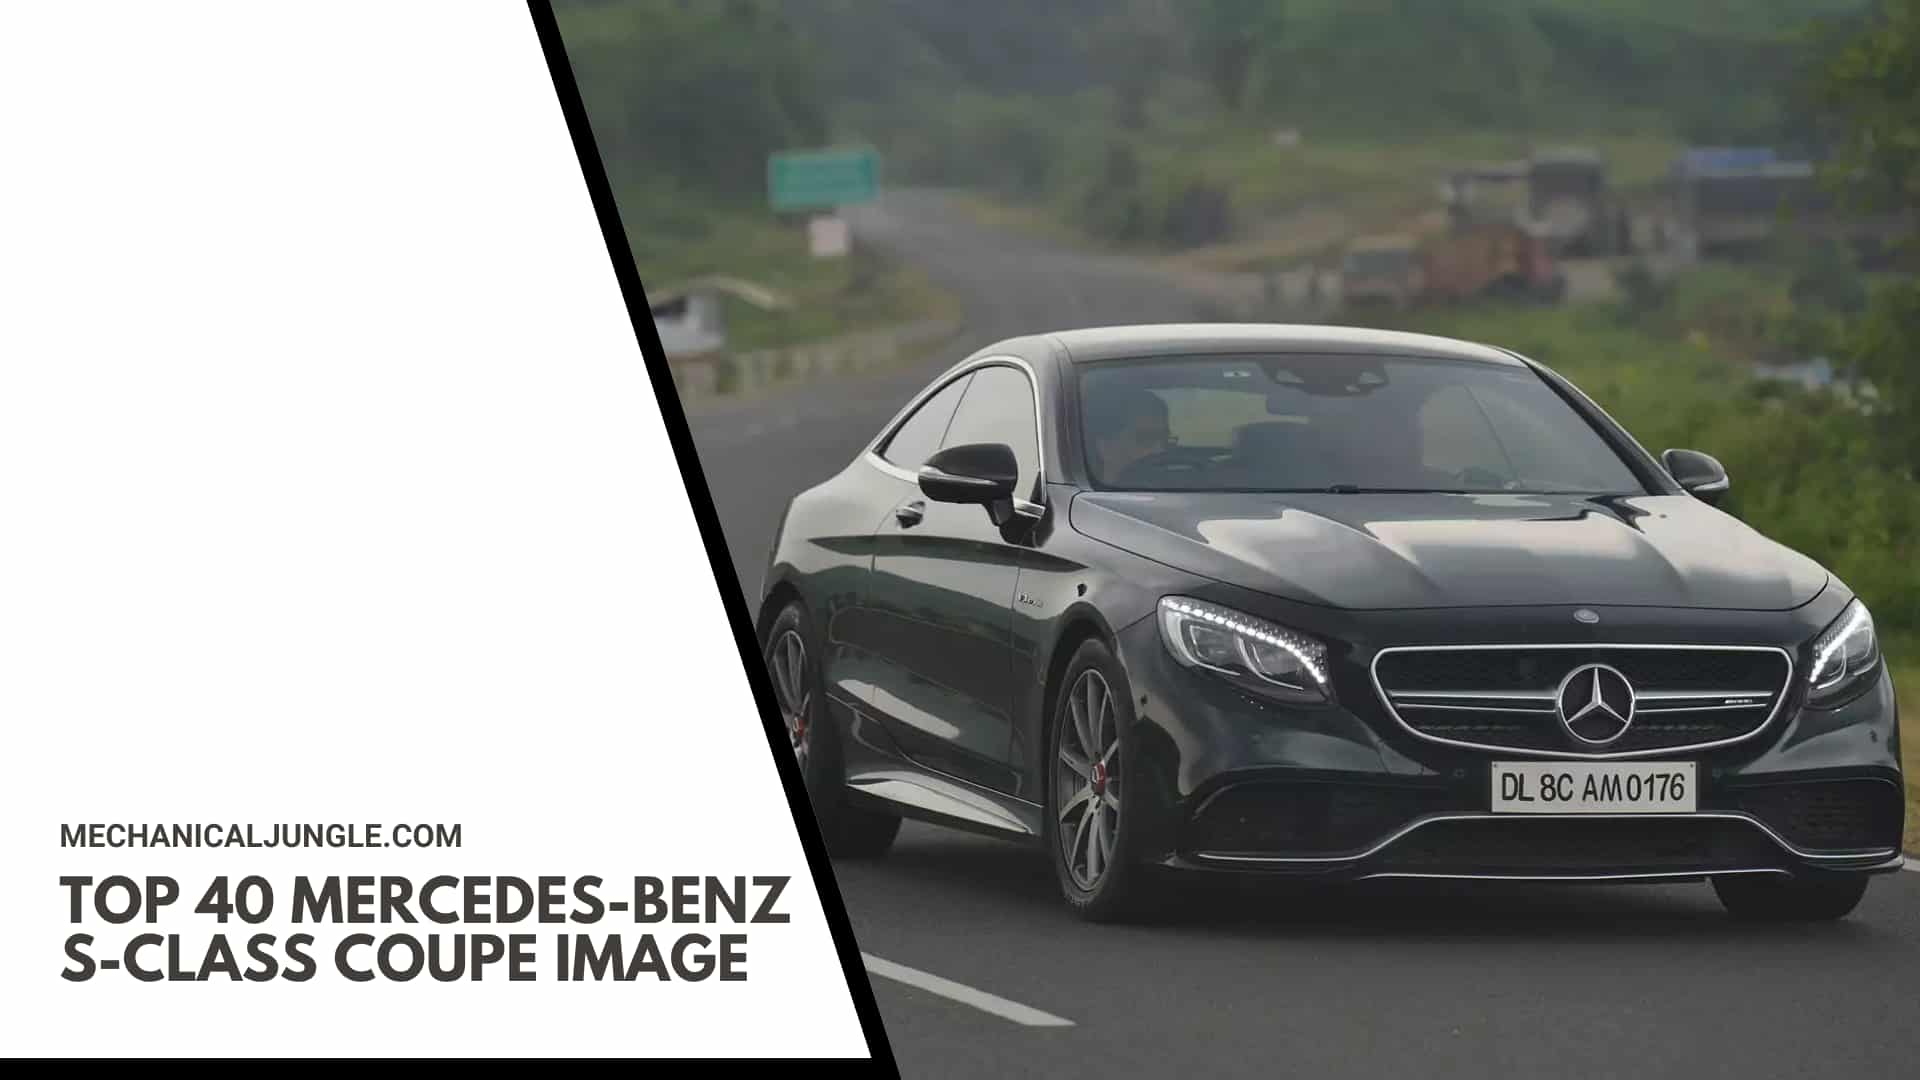 Top 40 Mercedes-Benz S-Class Coupe Image